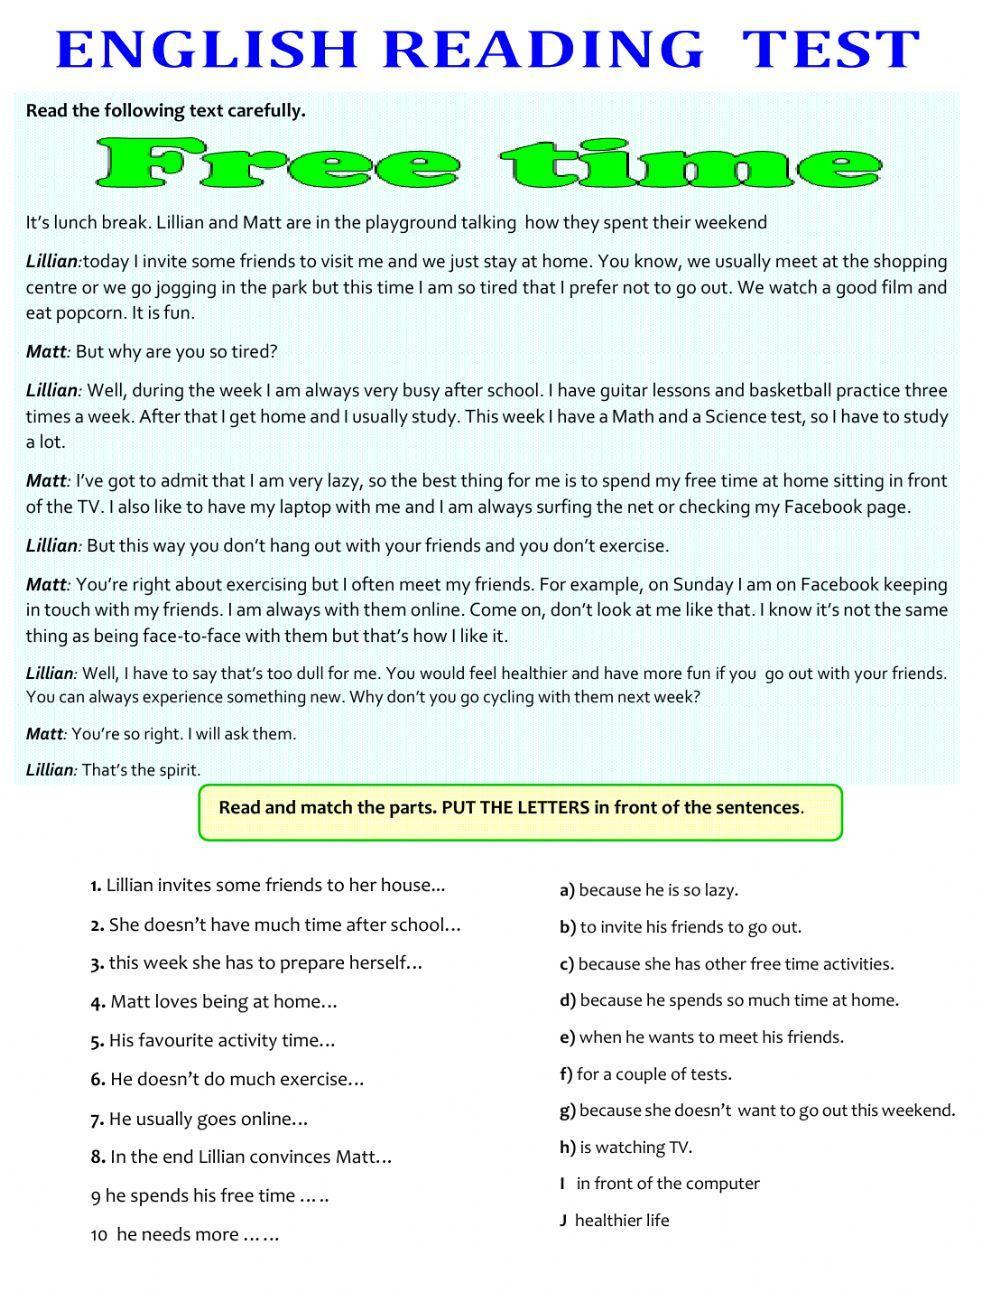 Reading exercise : free time